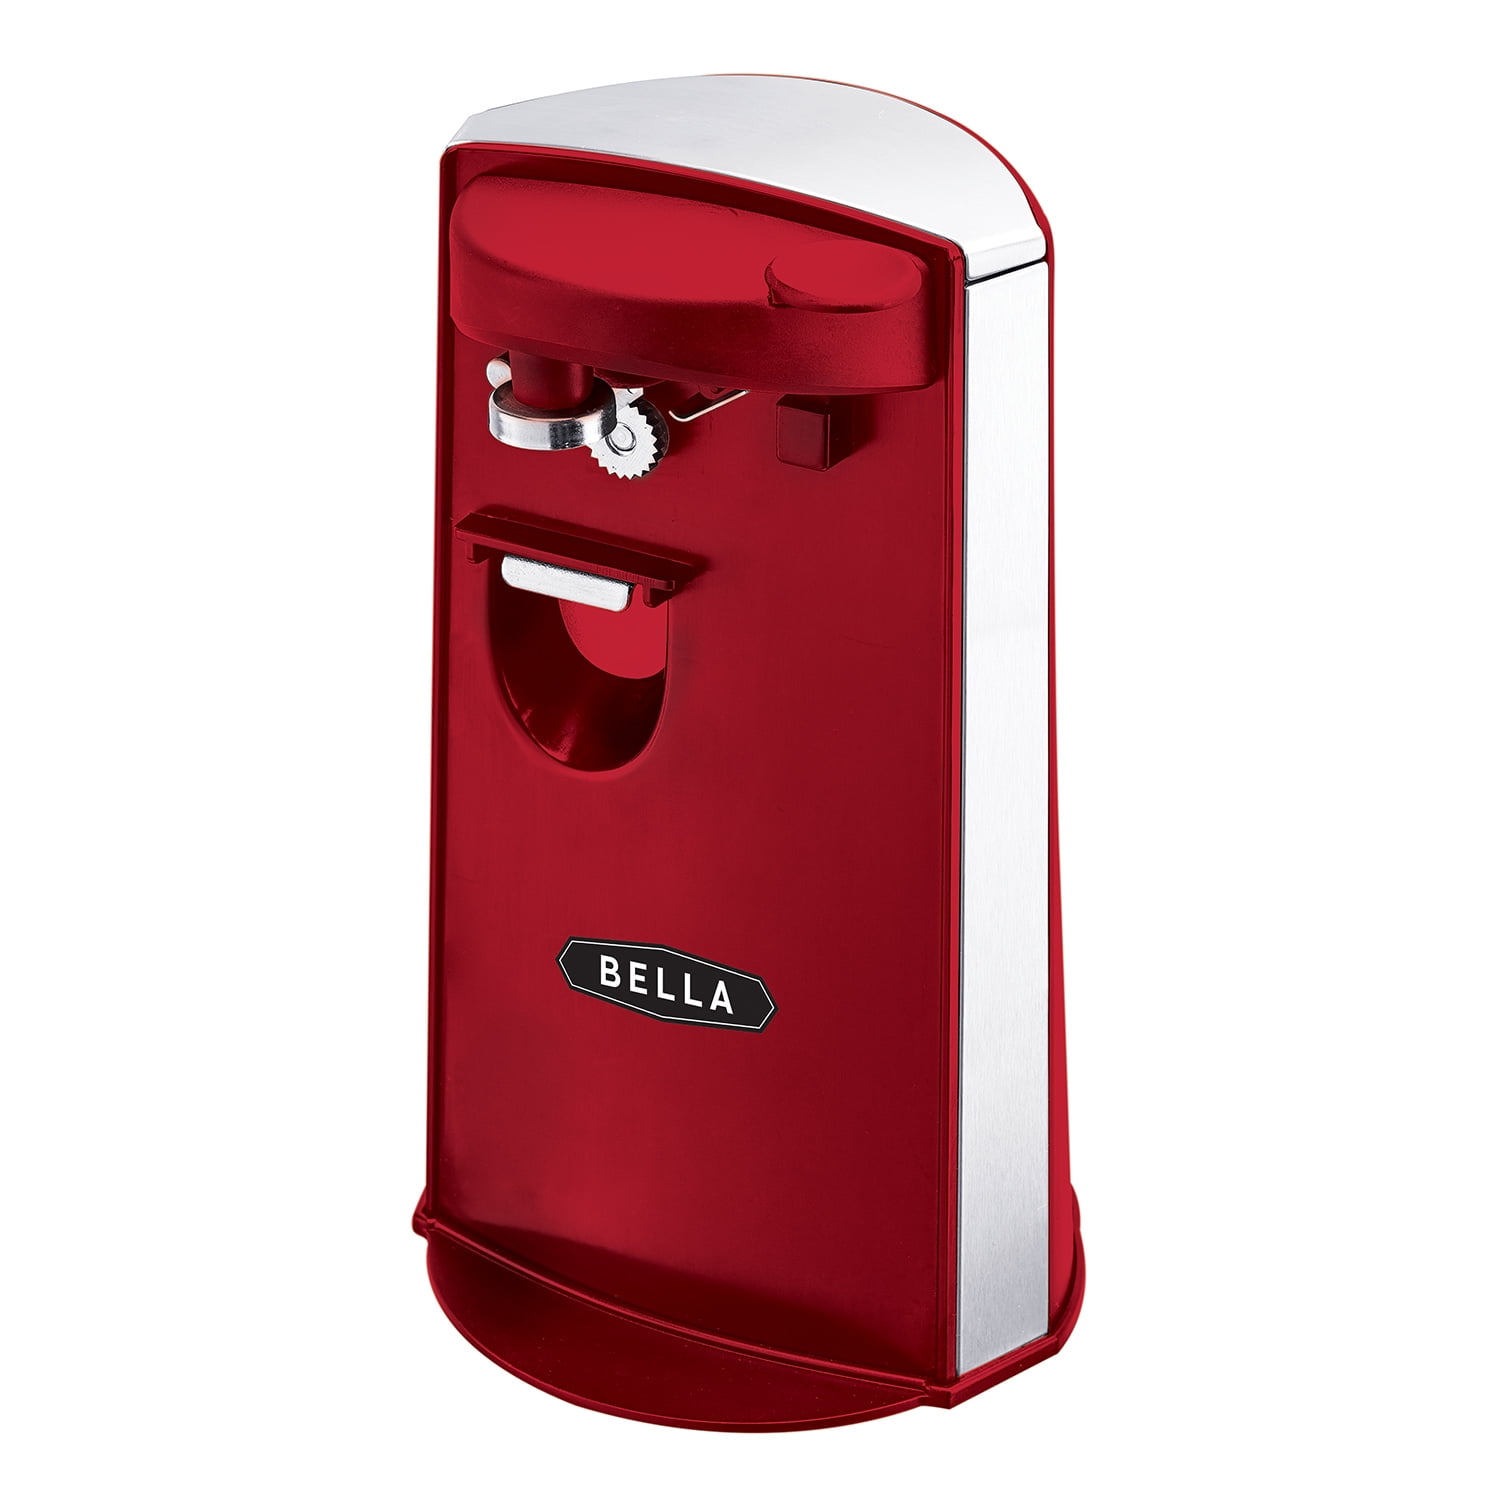 User manual Bella Electric Can Opener (English - 16 pages)